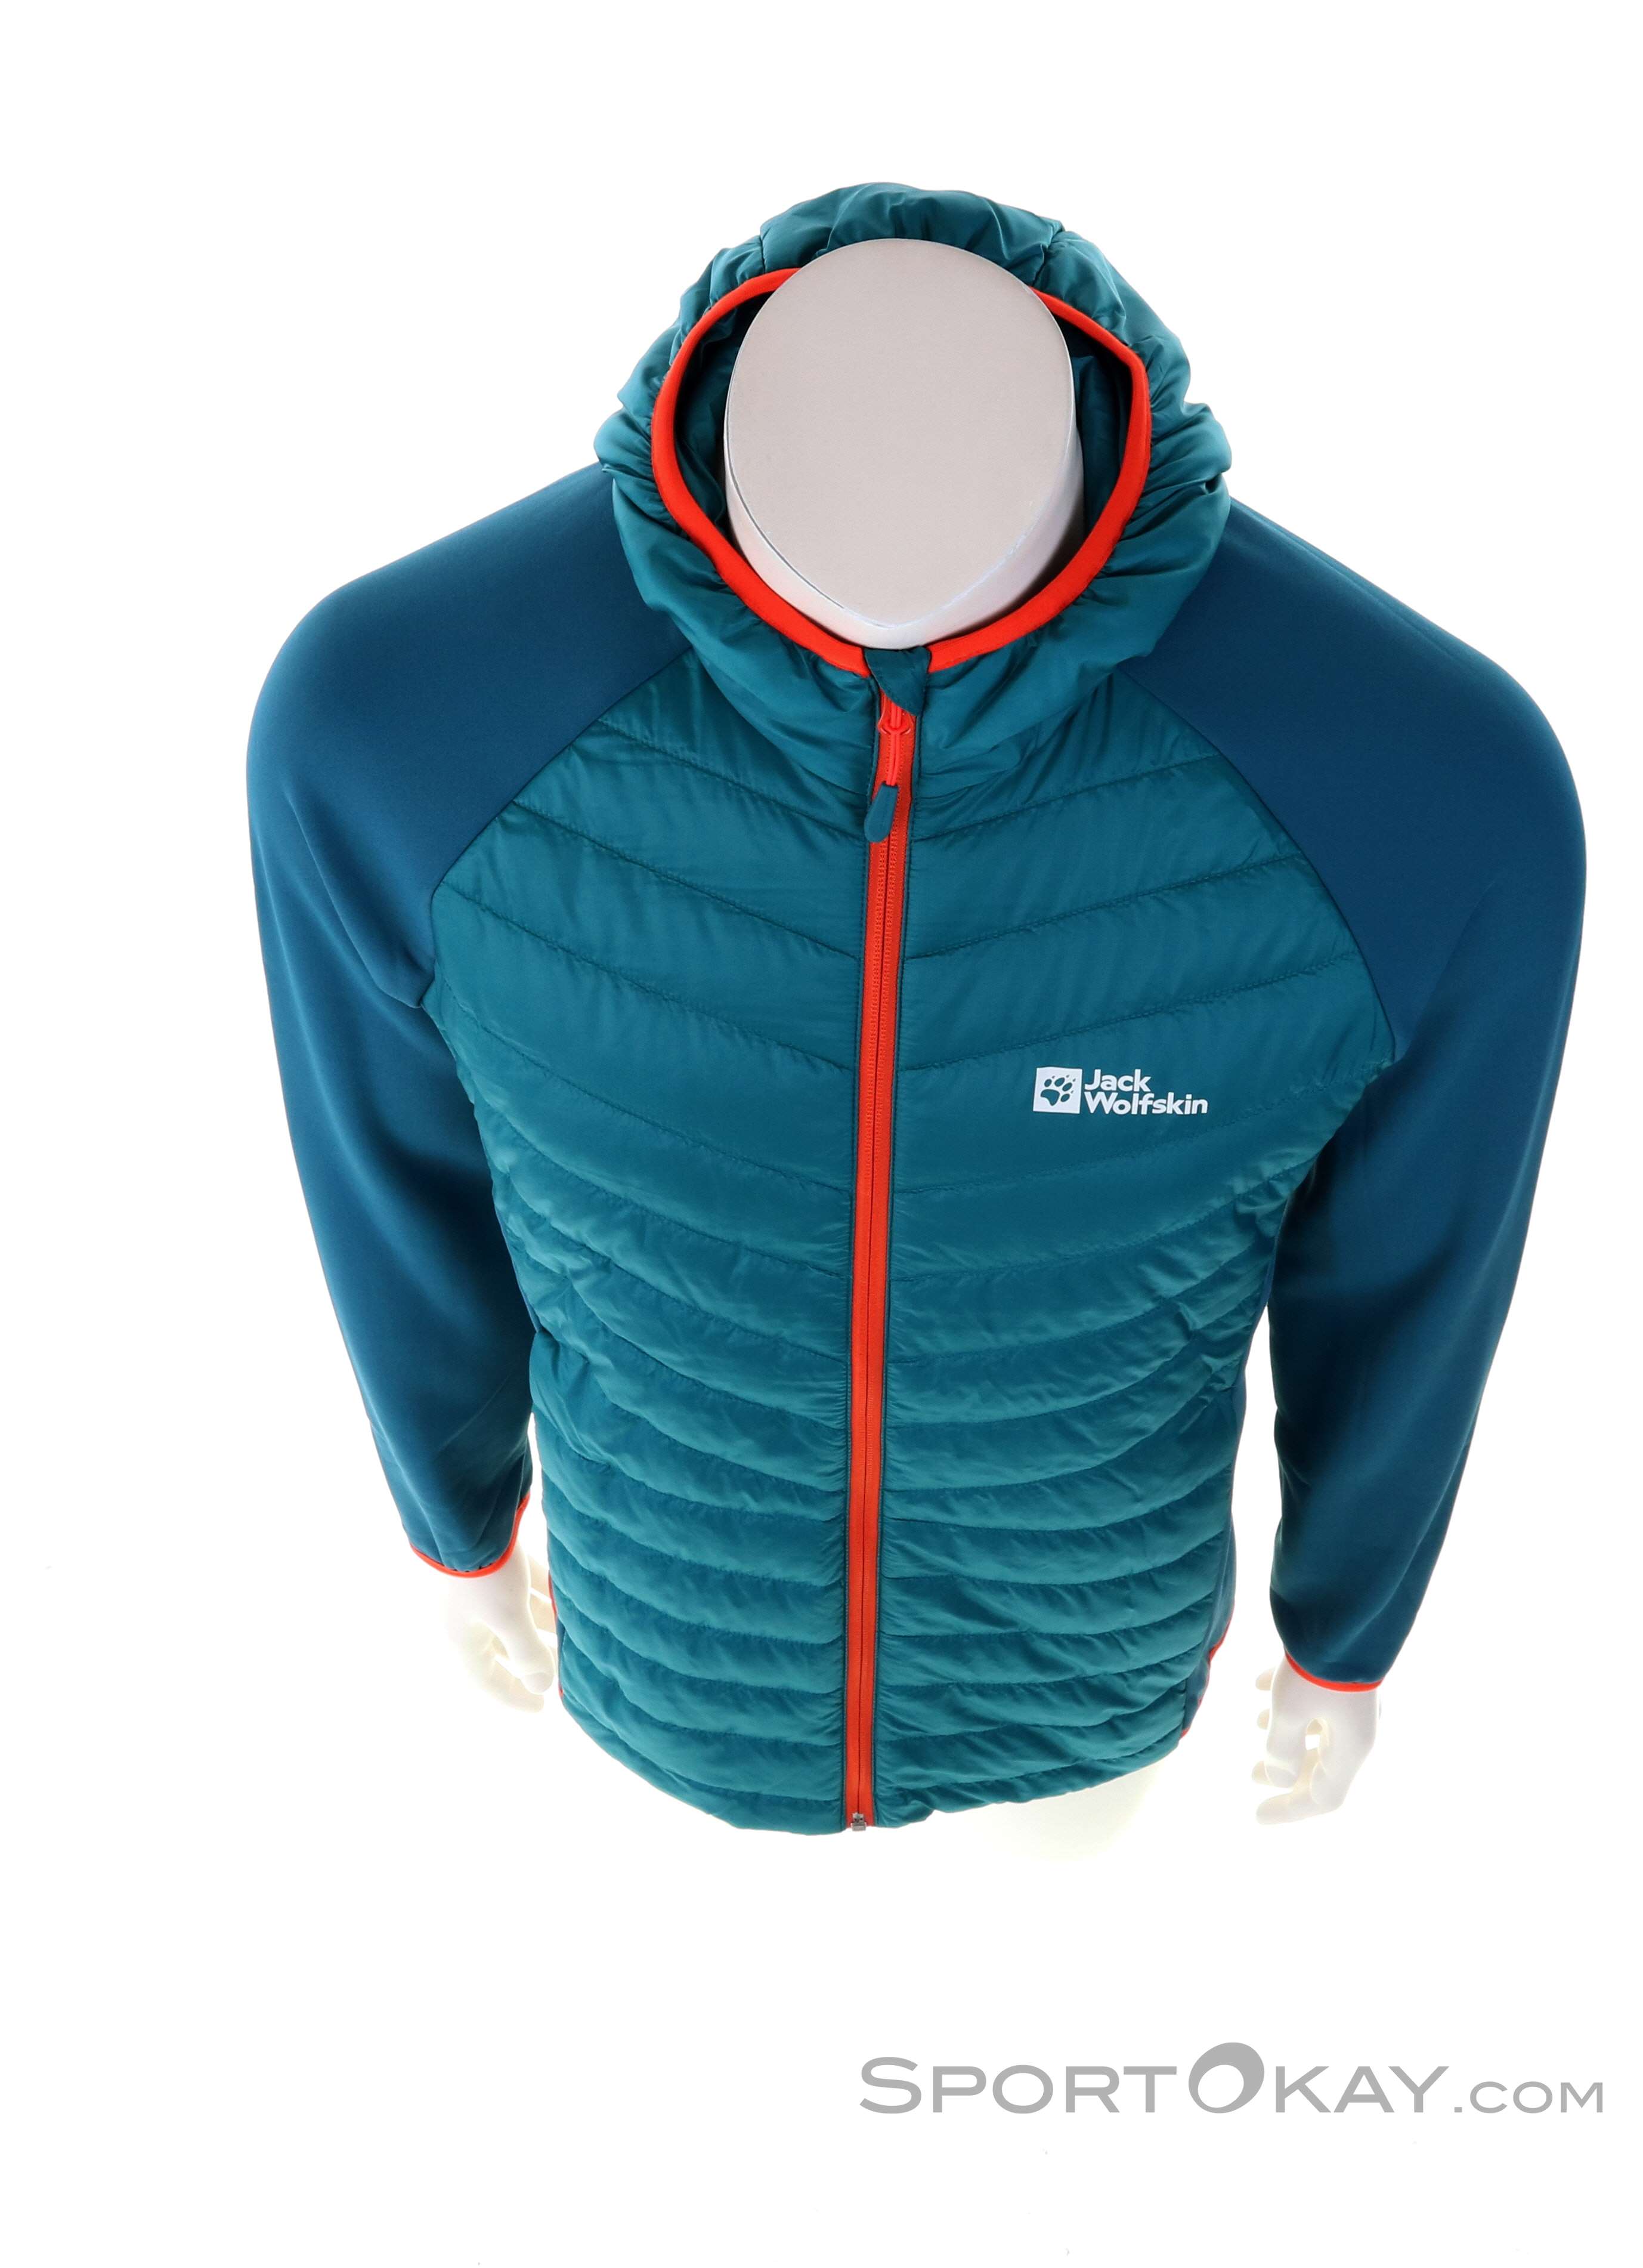 - All Mens Wolfskin - Outdoor Jack - Jackets Hybrid Outdoor - Outdoor Jacket Clothing Routeburn Pro